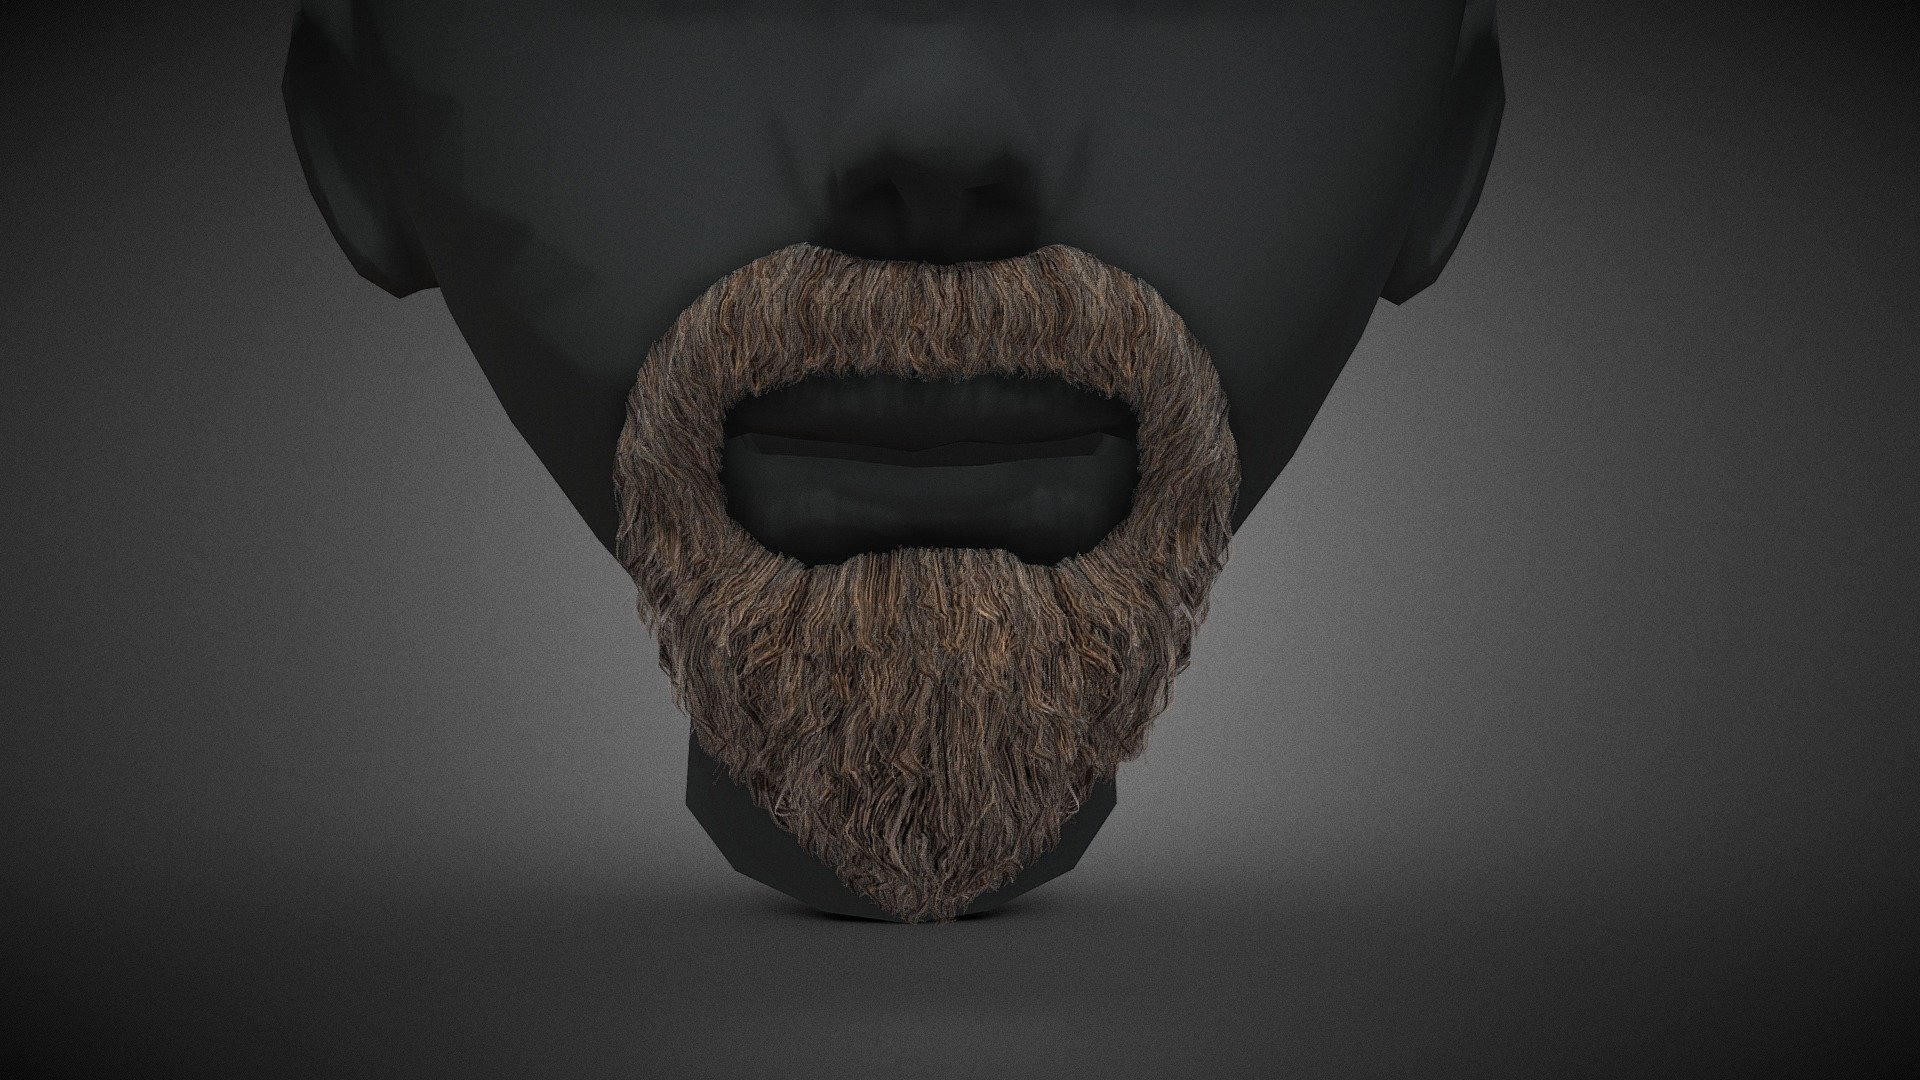 CG StudioX Present :
Facial Hair Cards Style 4 - Circle Beard lowpoly/PBR




The photo been rendered using Marmoset Toolbag 4 (real time game engine )

The head model is decimated to show how the hair looks on the head.


Features :



Comes with Specular and Metalness PBR 4K texture .

Good topology.

Low polygon geometry.

The Model is prefect for game for both Specular workflow as in Unity and Metalness as in Unreal engine .

The model also rendered using Marmoset Toolbag 4 with both Specular and Metalness PBR and also included in the product with the full texture.

The texture can be easily adjustable .


Texture :



One set of UV for the Hair [Albedo -Normal-Metalness -Roughness-Gloss-Specular-Ao-Alpha-Depth-Direction-ID-Root] (4096*4096).

One set of UV for the Cap [Albedo -Normal-Metalness -Roughness-Gloss-Specular-Alpha] (4096*4096).


Files :
Marmoset Toolbag 4 ,Maya,,FBX,glTF,Blender,OBj with all the textures.




Contact me for if you have any questions.
 - Facial Hair Cards Style 4 - Circle Beard - Buy Royalty Free 3D model by CG StudioX (@CG_StudioX) 3d model